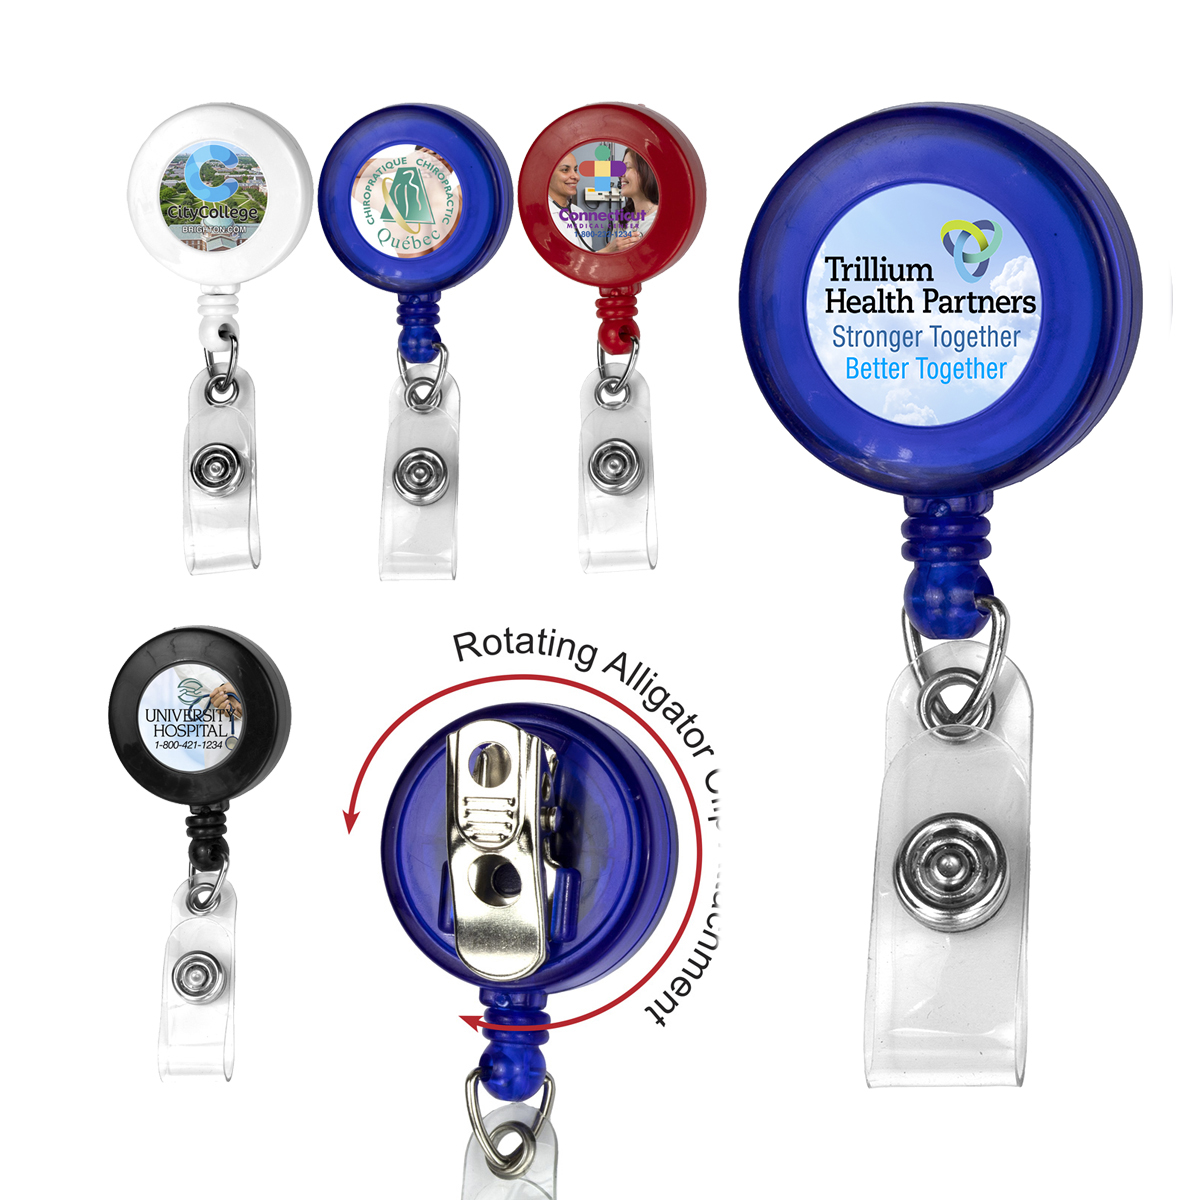 Oval Round Reel ID Card Holder, ID Badge Reel Clip On Card Holders Blue  Colour (5)